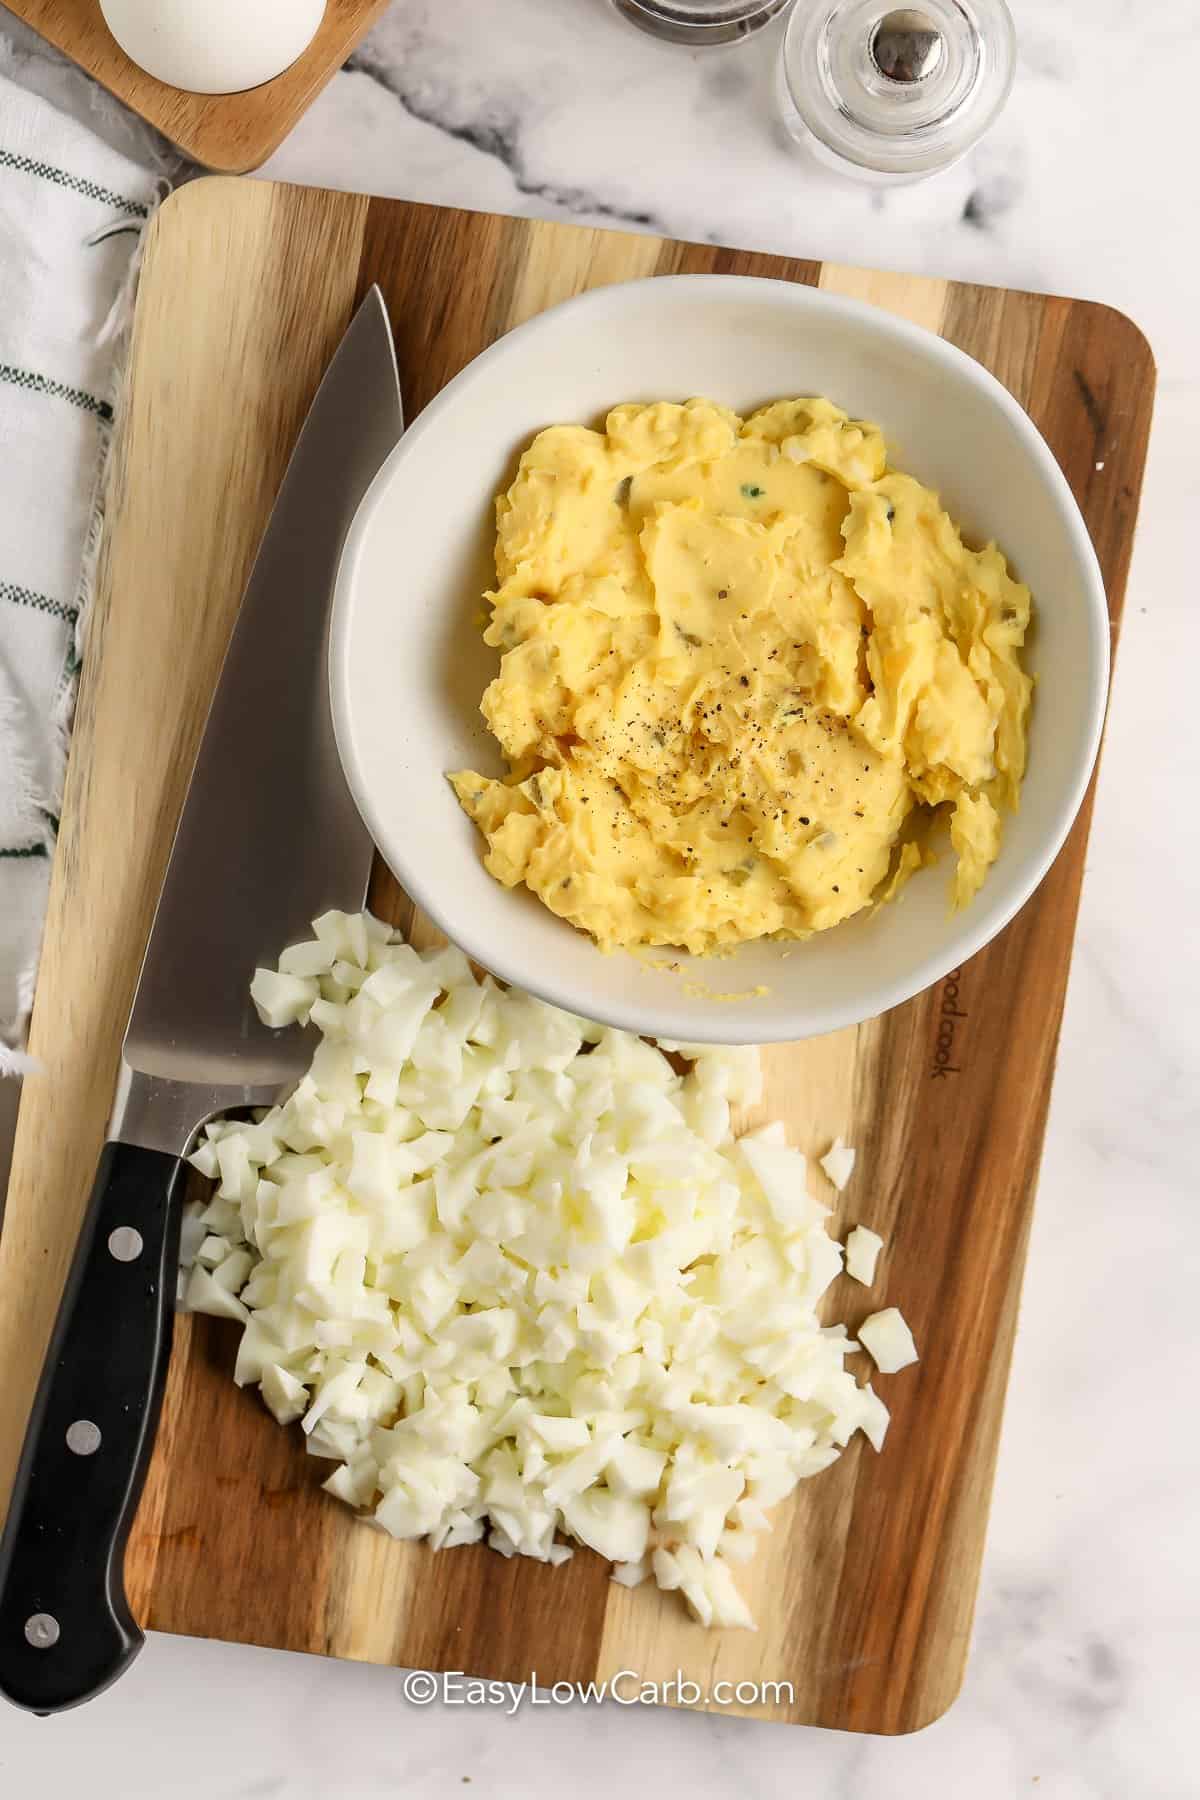 process to make Keto Egg Salad - egg yolks mixed up and egg whited chopped on a wooden board